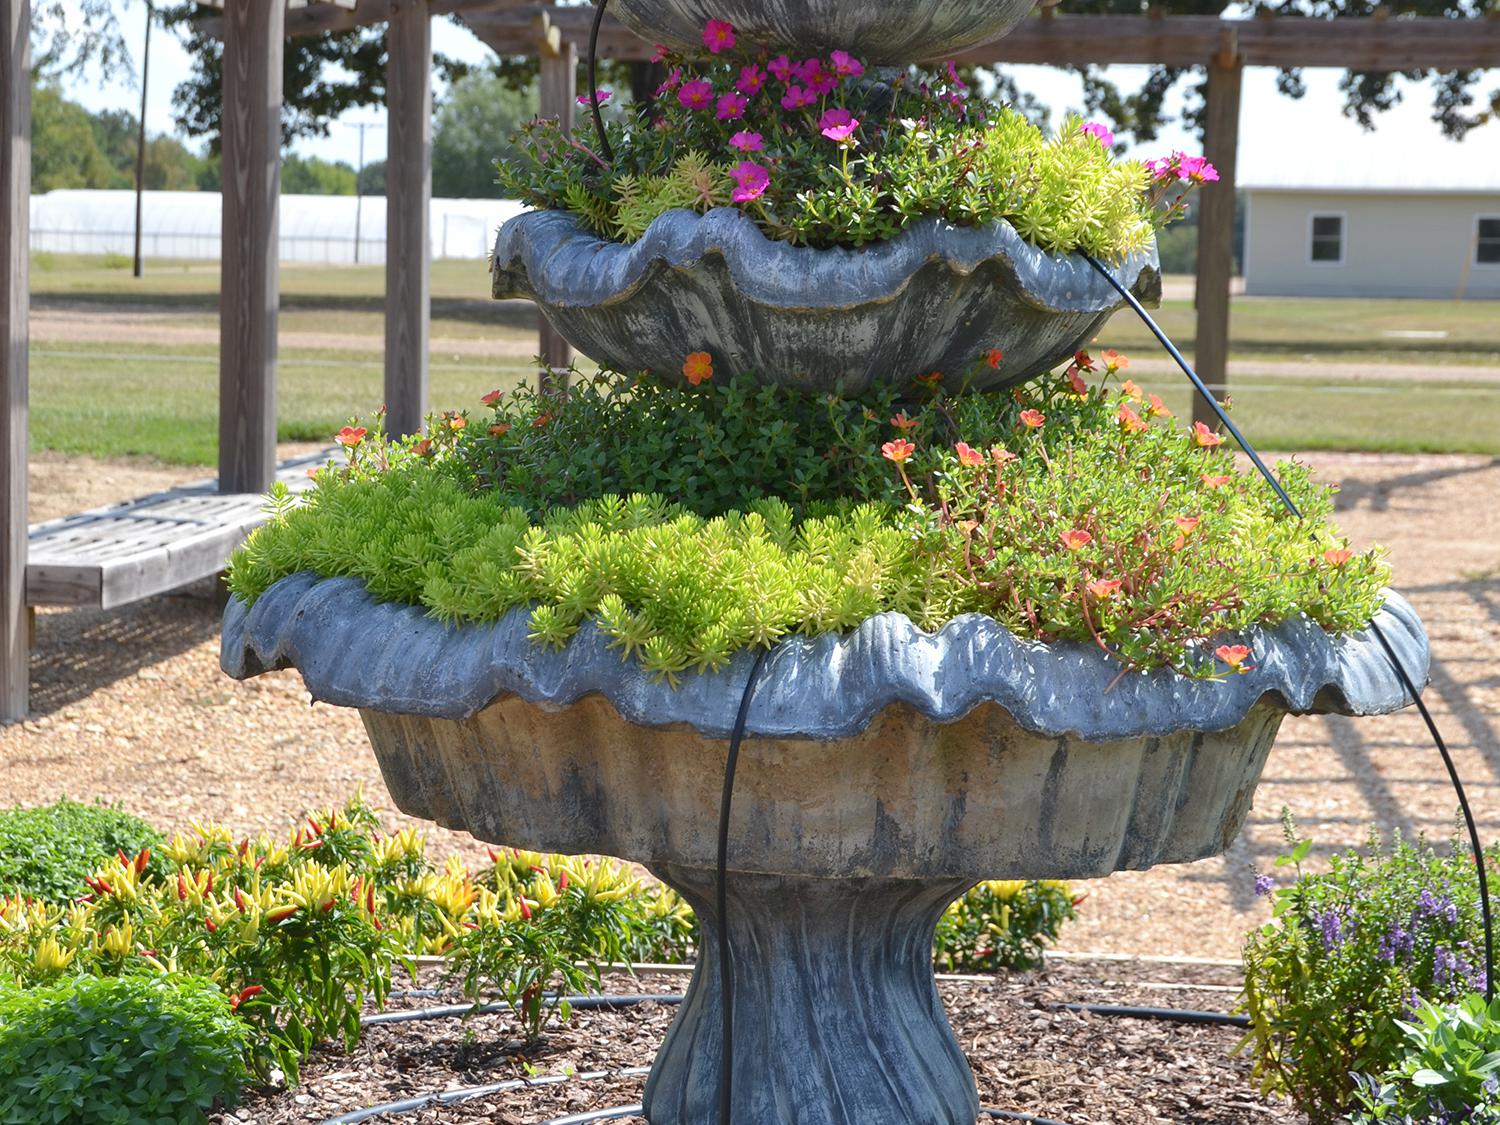 Staff members at the Mississippi State University Truck Crops Experiment Station are working to put together displays such as this flower-filled fountain for the Fall Flower & Garden Fest scheduled for Oct. 16 and 17 at the station. (Photo by MSU Ag Communications/Susan Collins-Smith)